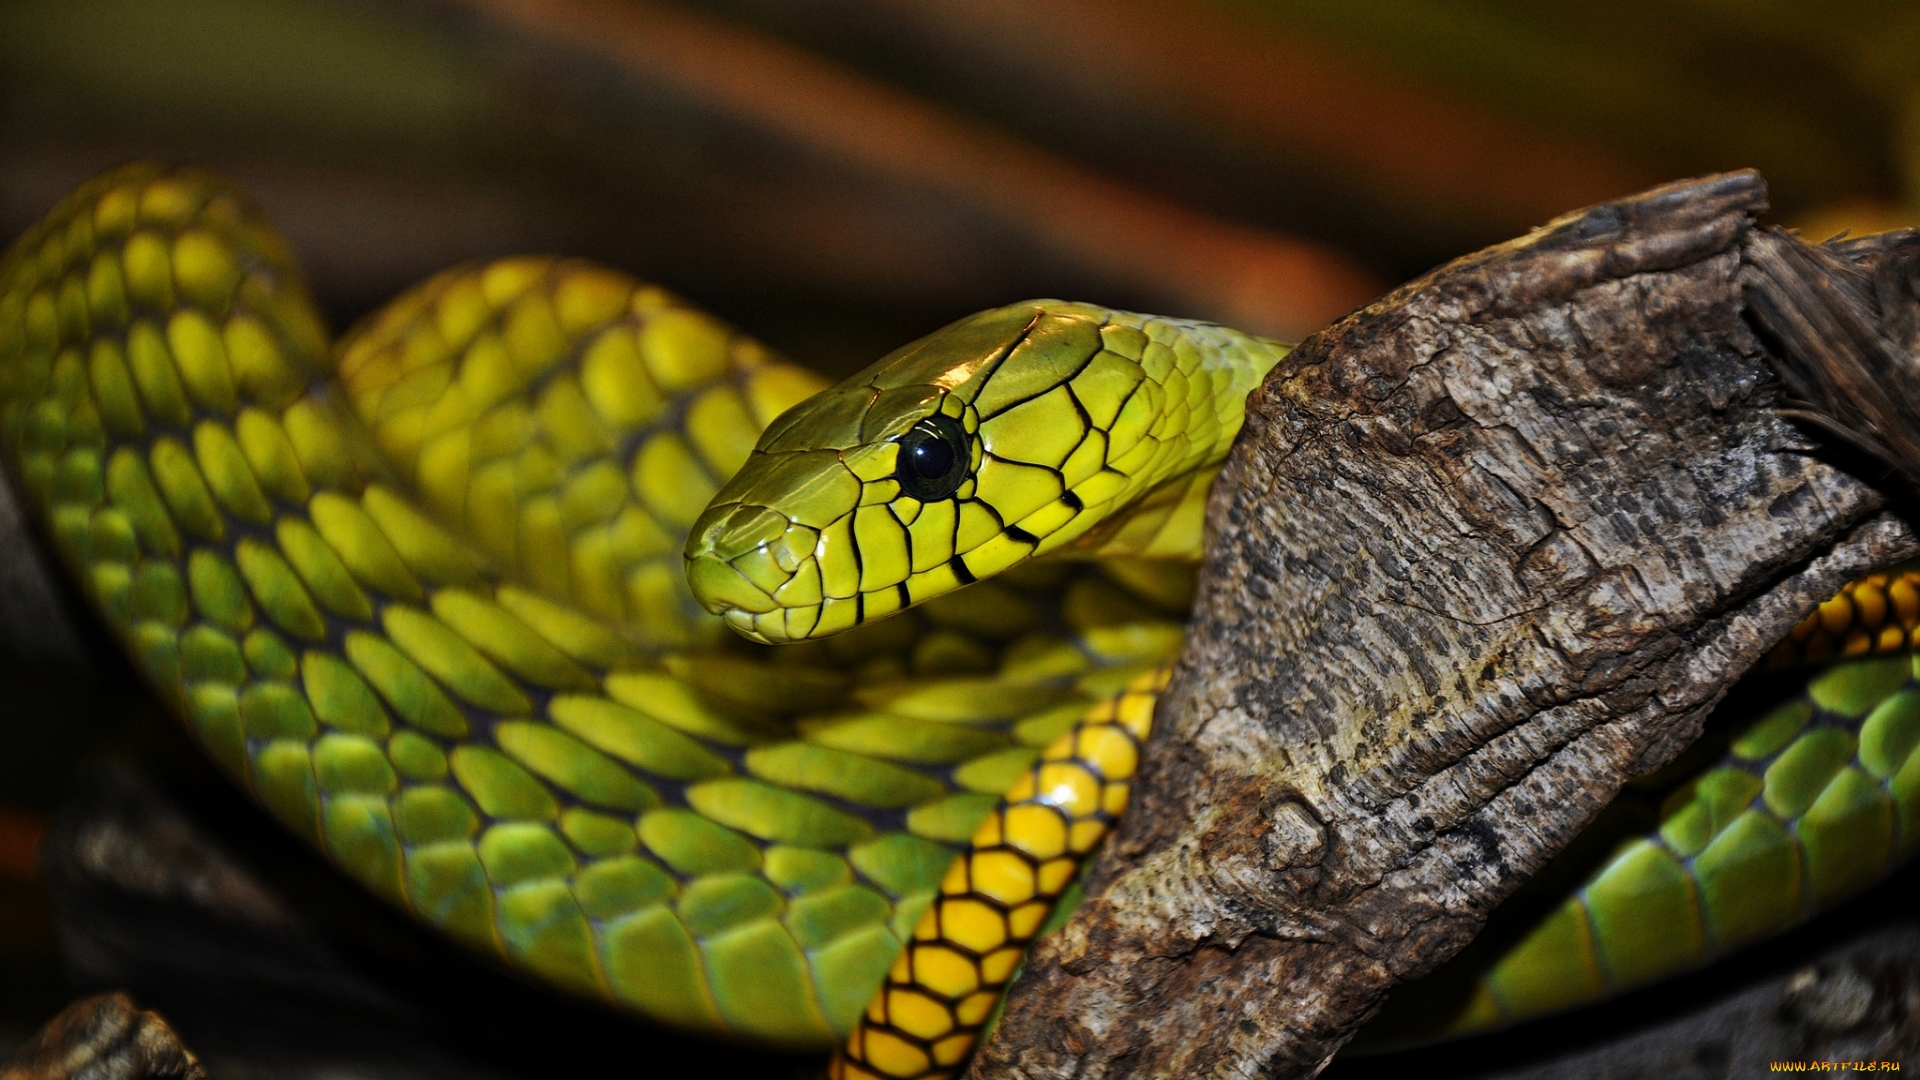 Wallpapers snake green yellow on the desktop